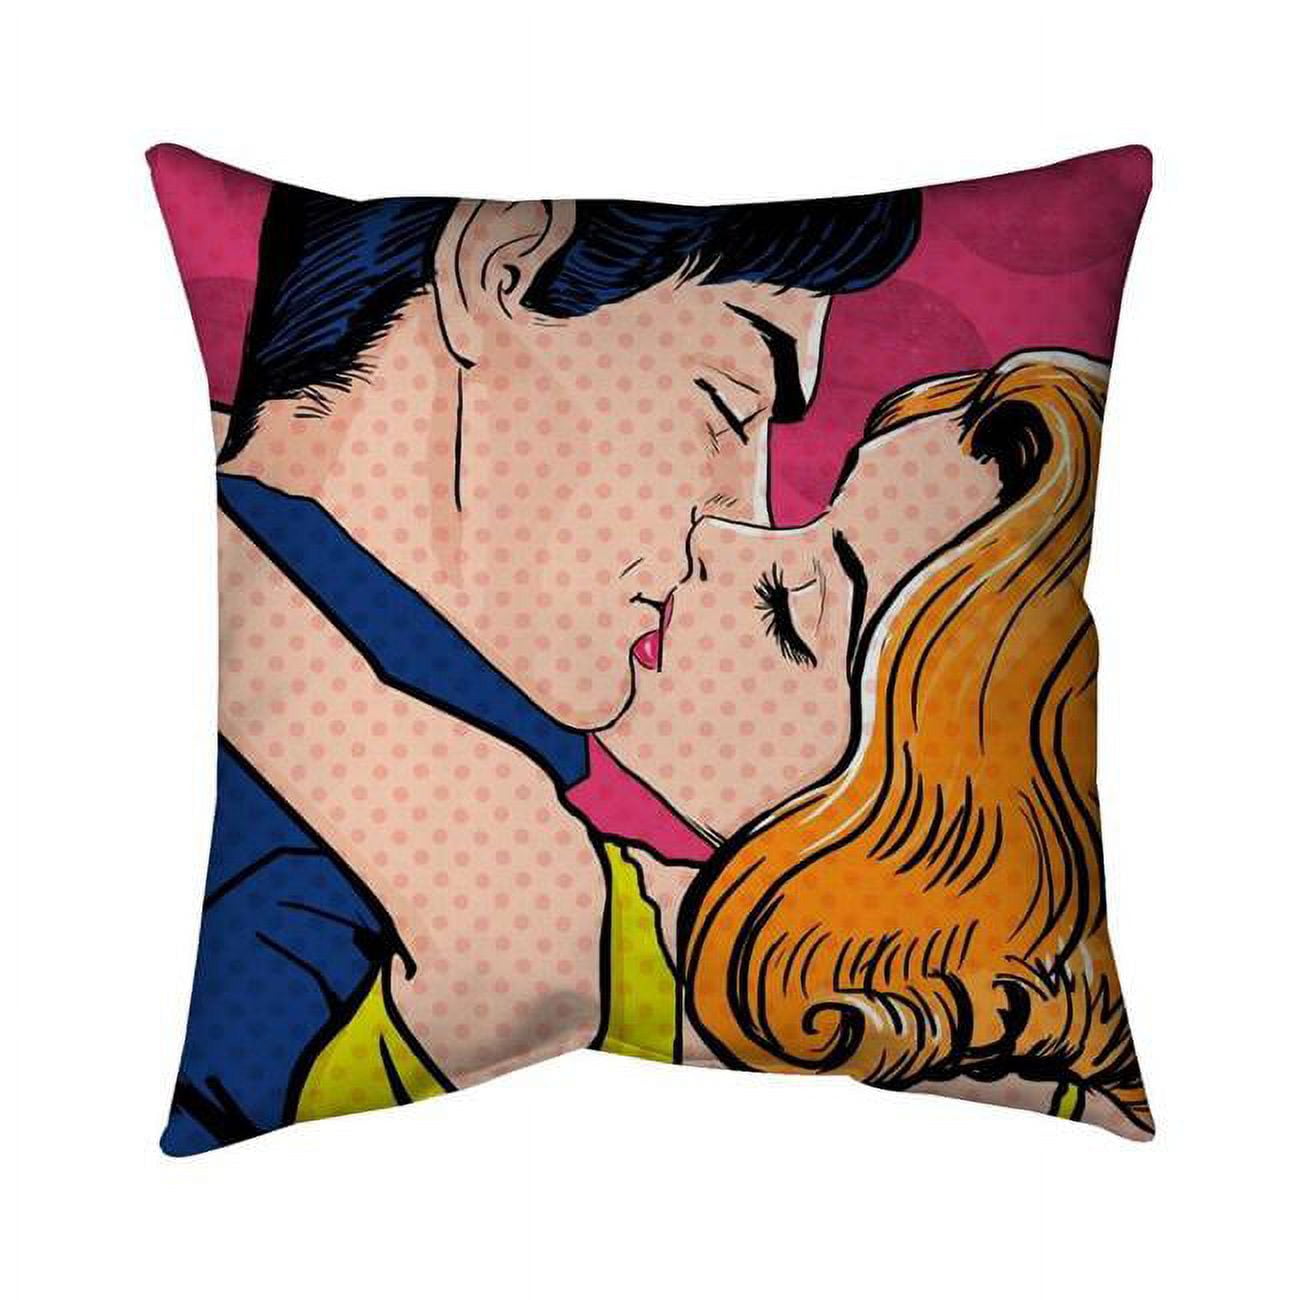 Begin Home Decor 5543-2020-MI10 20 x 20 in. Pop Art Style Couple-Double Sided Print Indoor Pillow Cover